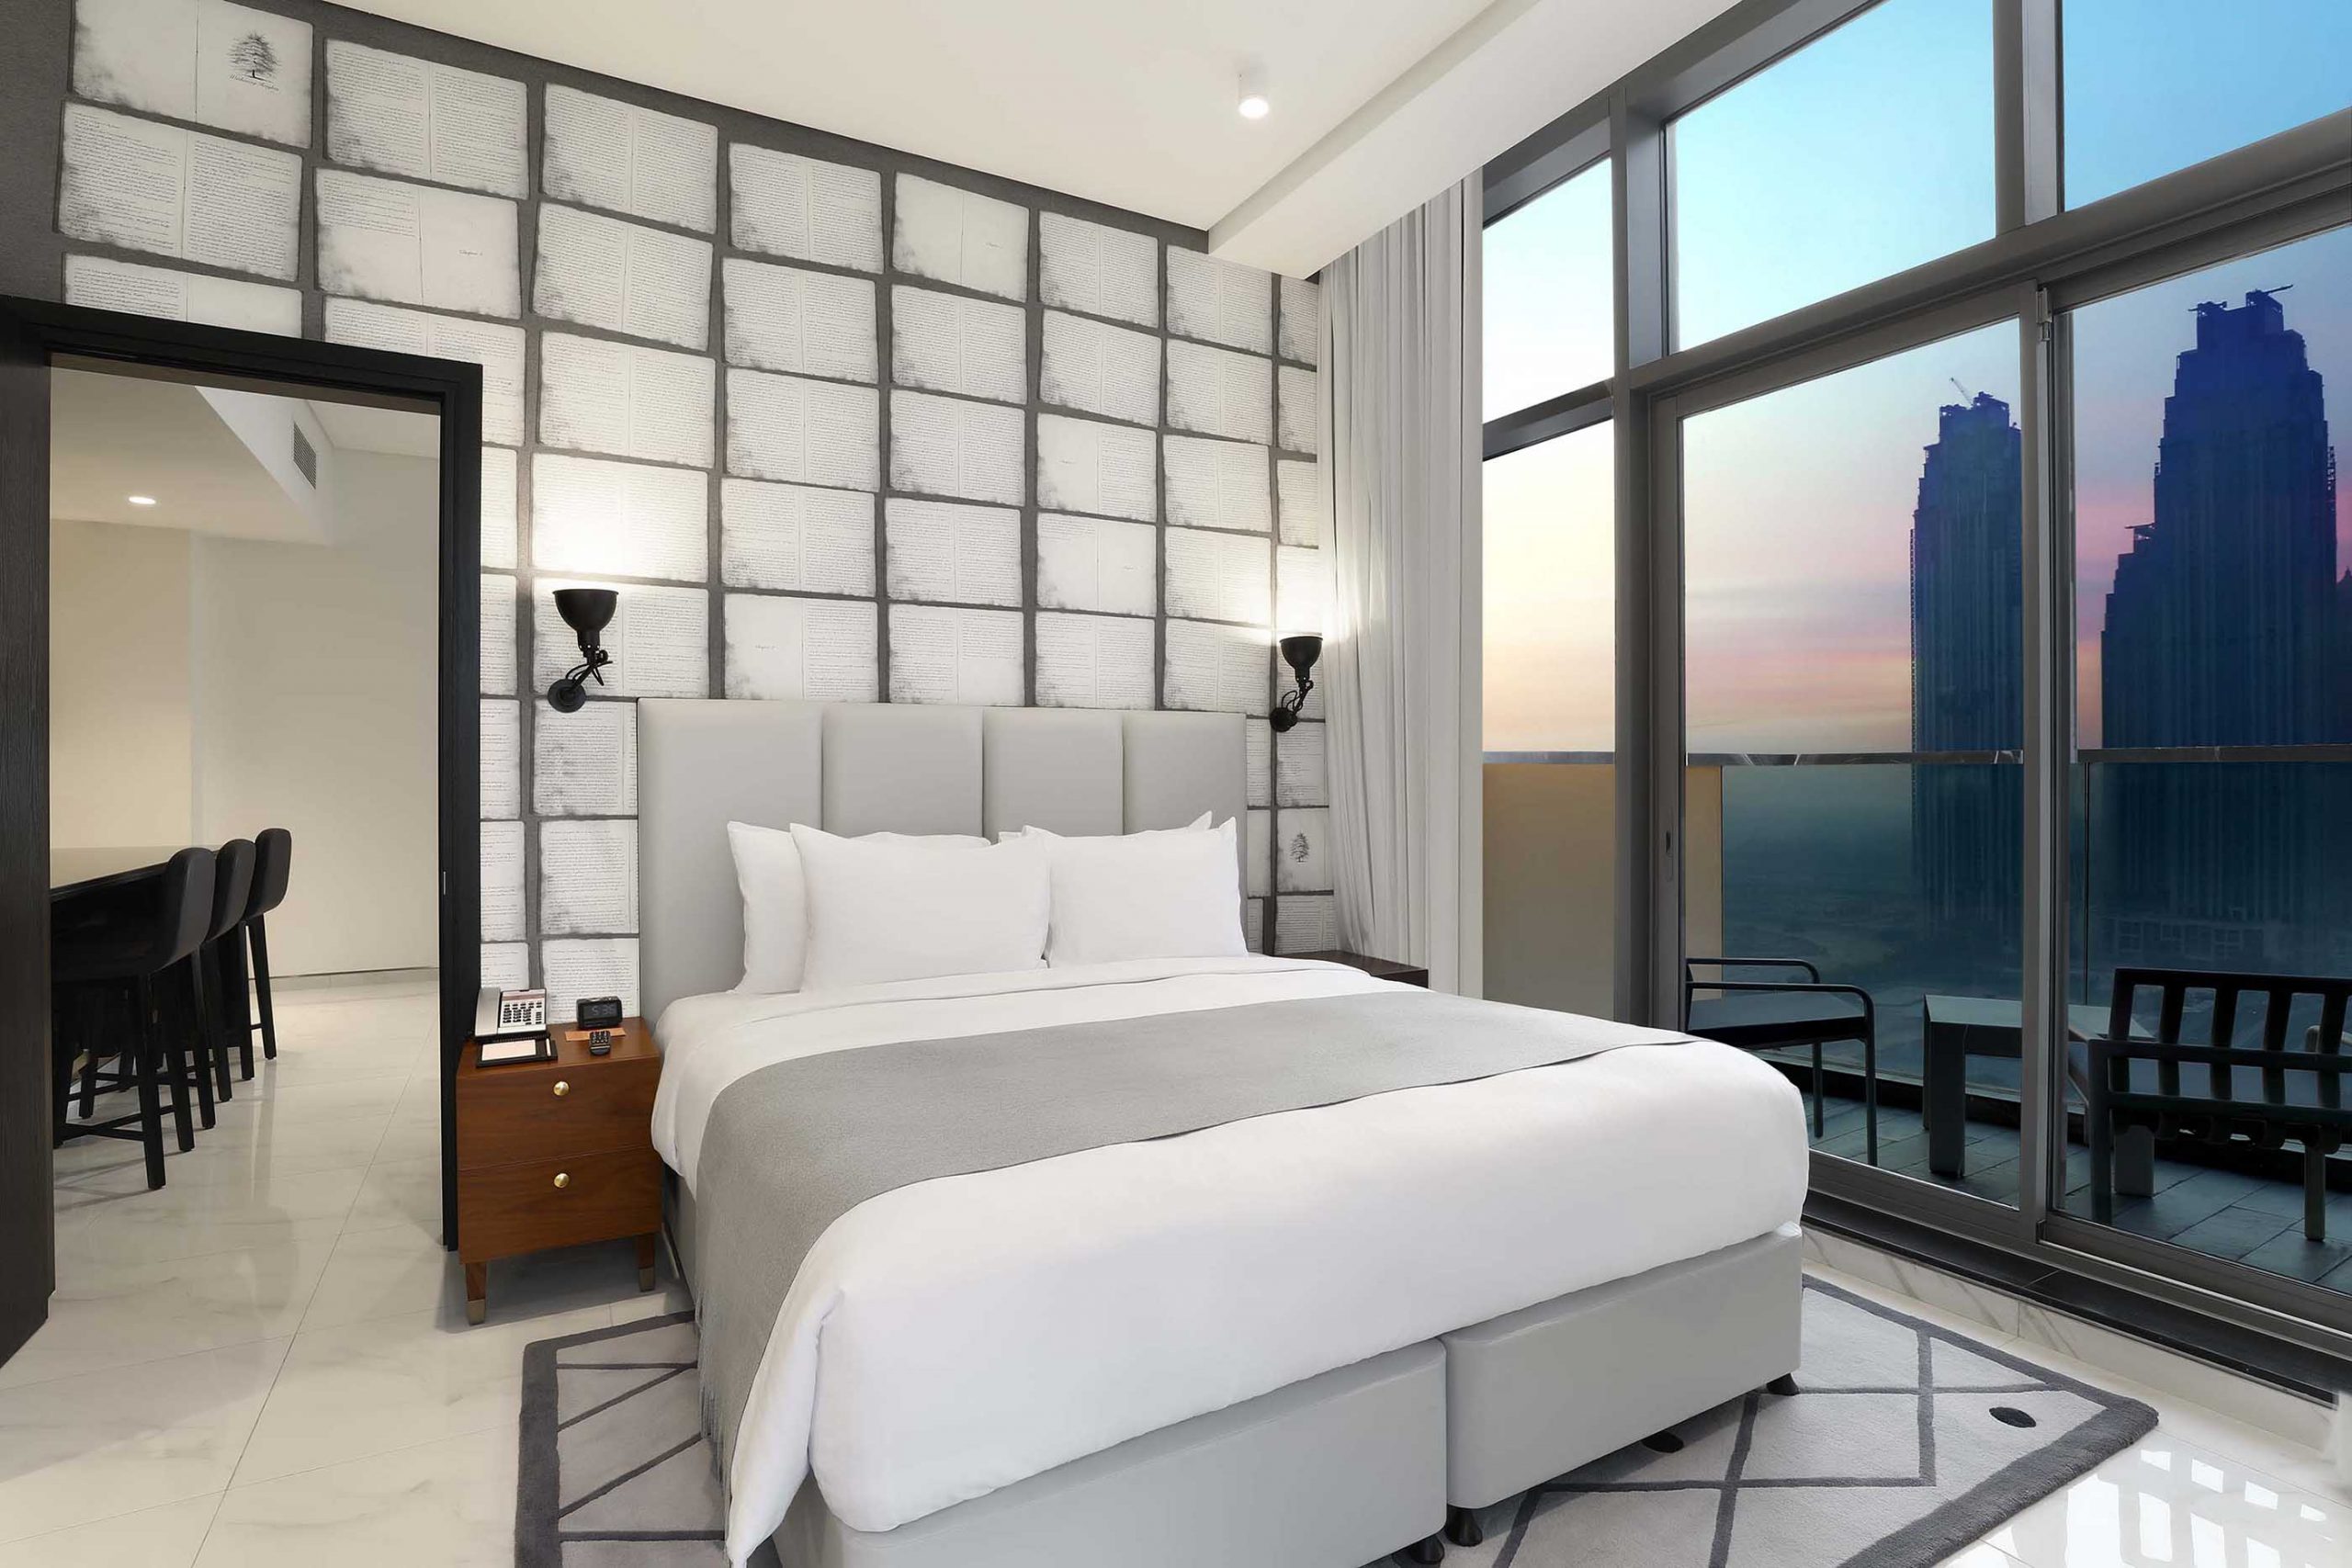 1 Bedroom Serviced Hotel Apartments For Rent In Dubai